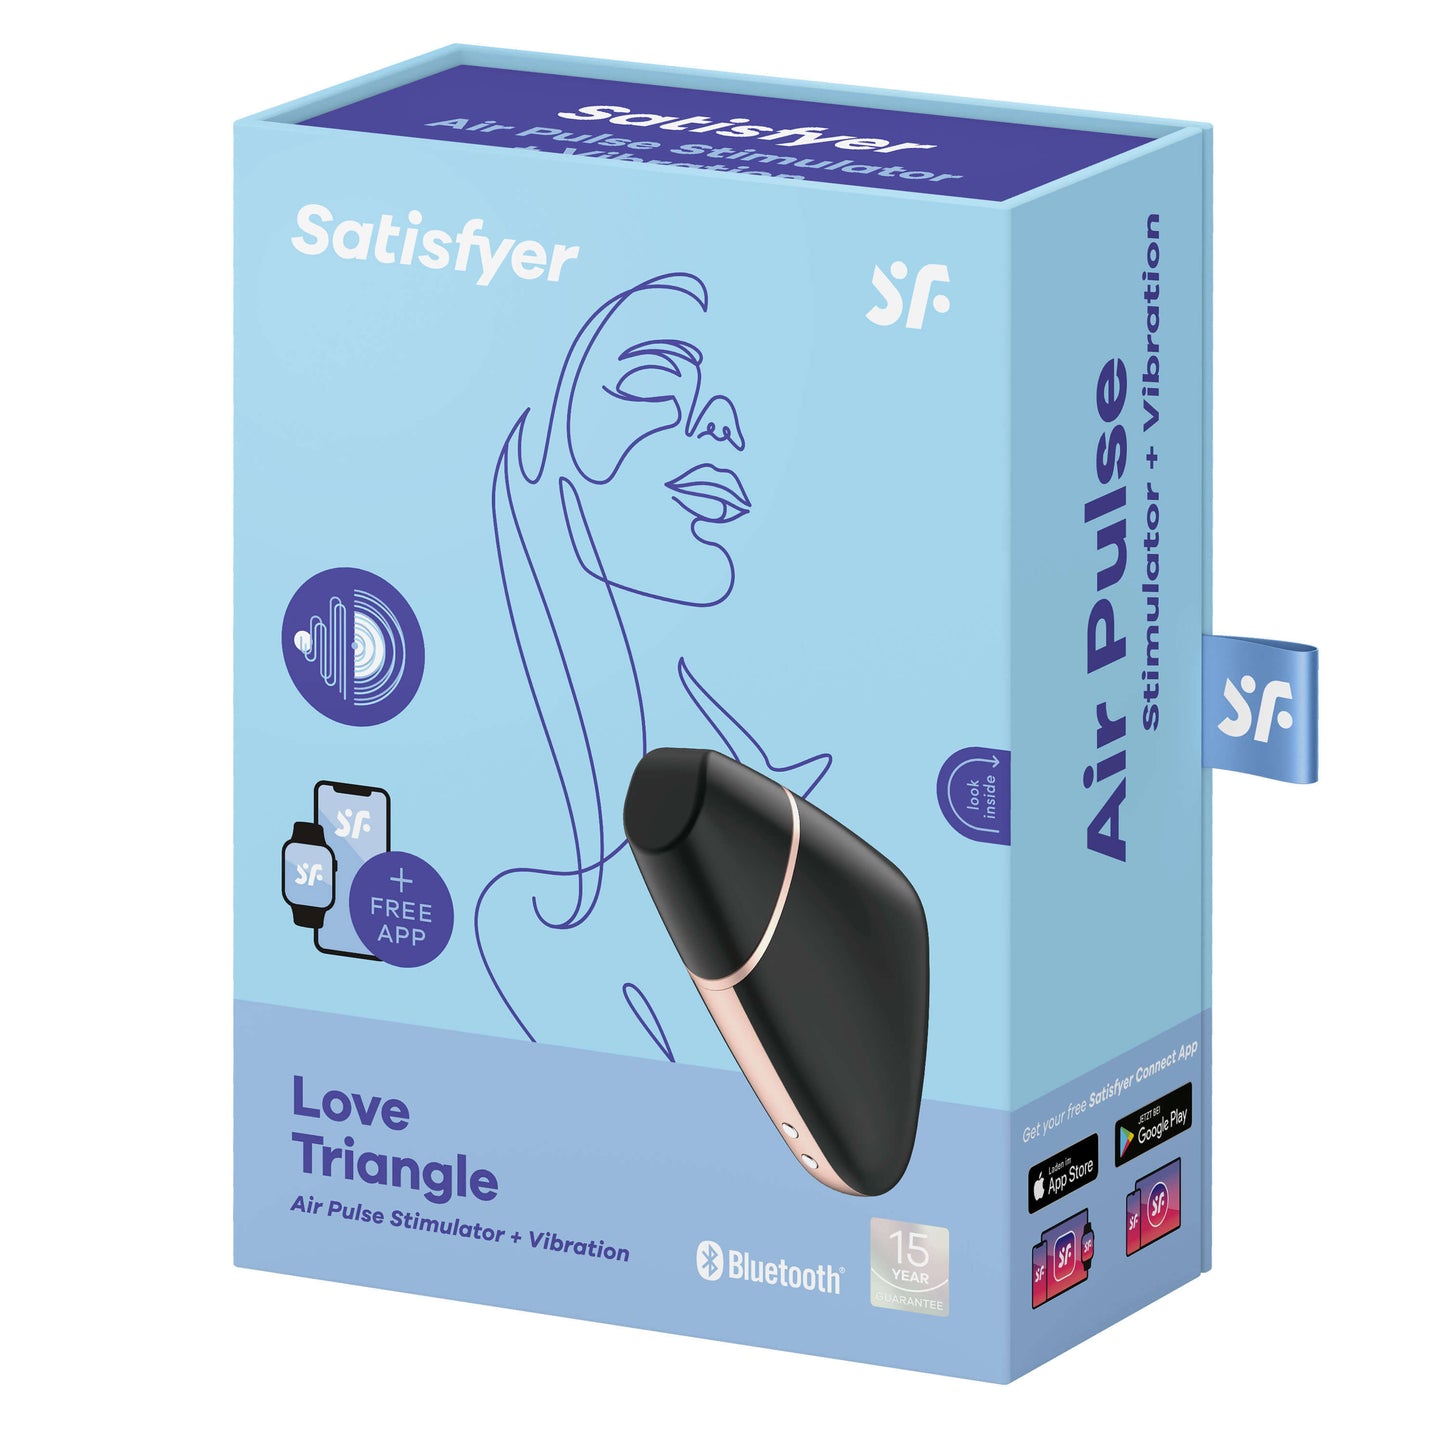 Satisfyer Love Triangle packaging - by The Bigger O an online sex toy shop. We ship to USA, Canada and the UK.